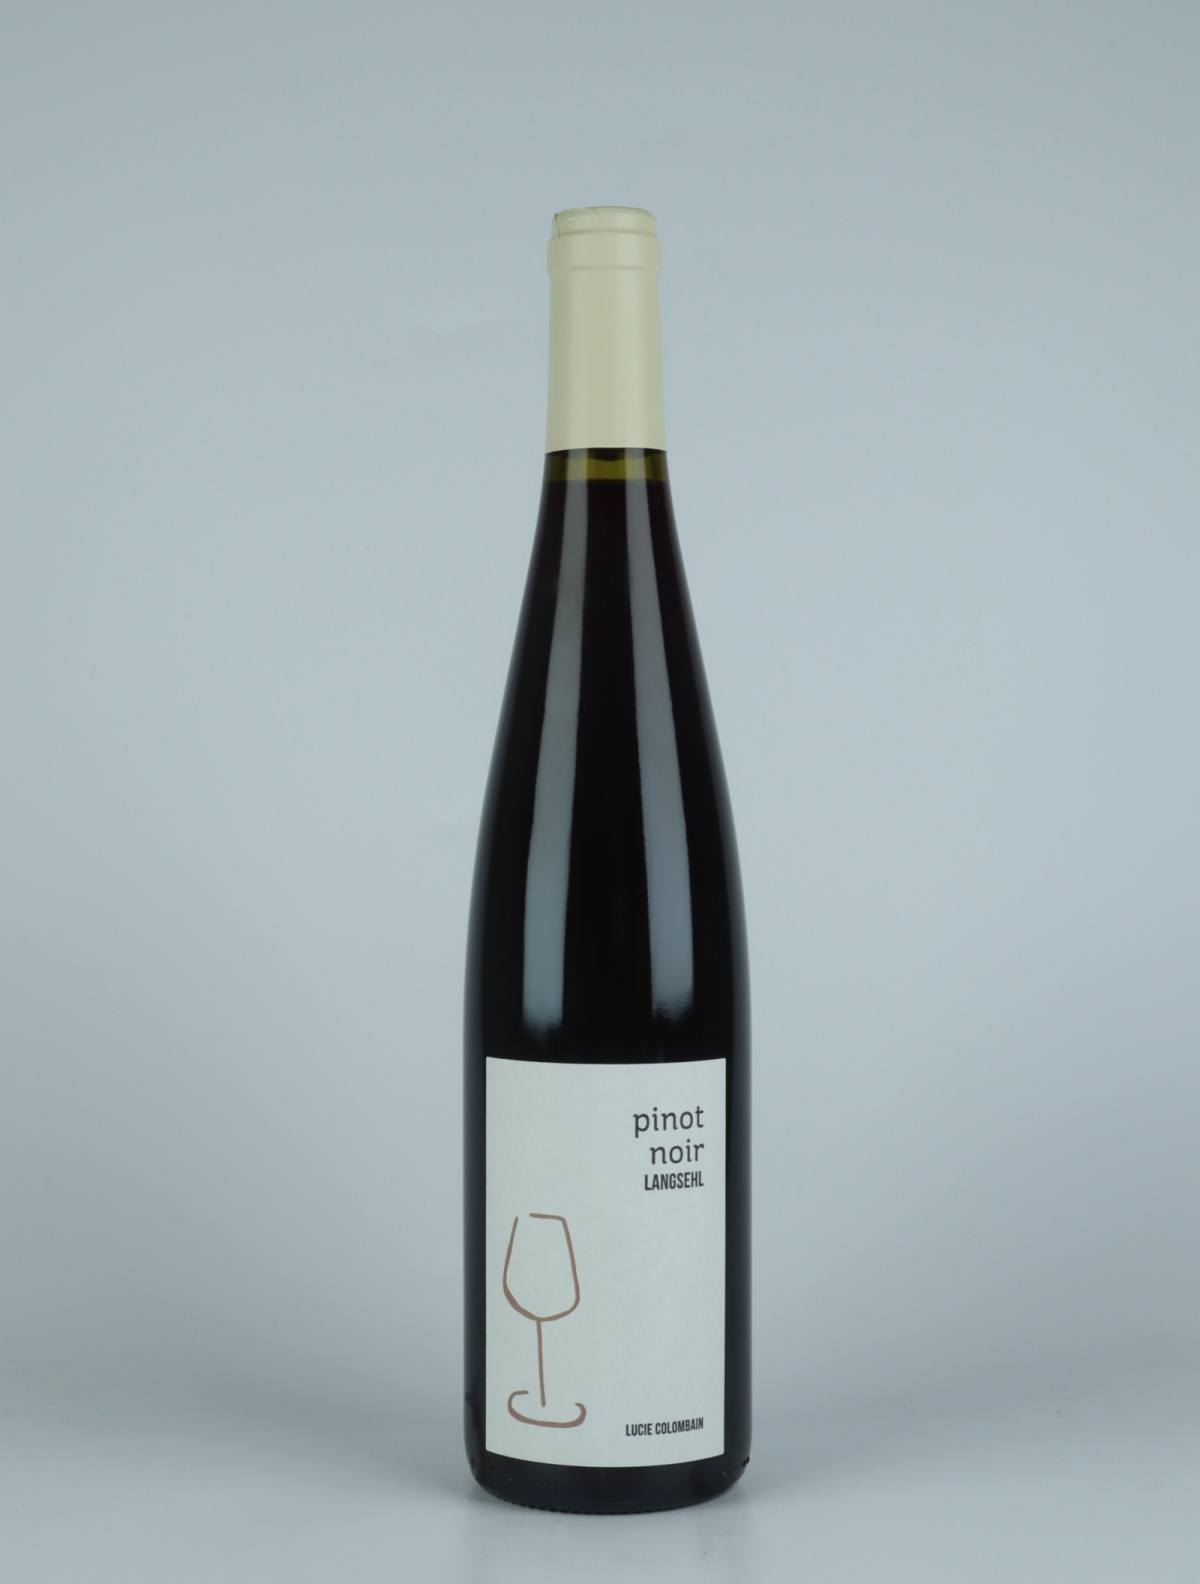 A bottle 2020 Pinot Noir - Langsehl Red wine from Lucie Colombain, Alsace in France